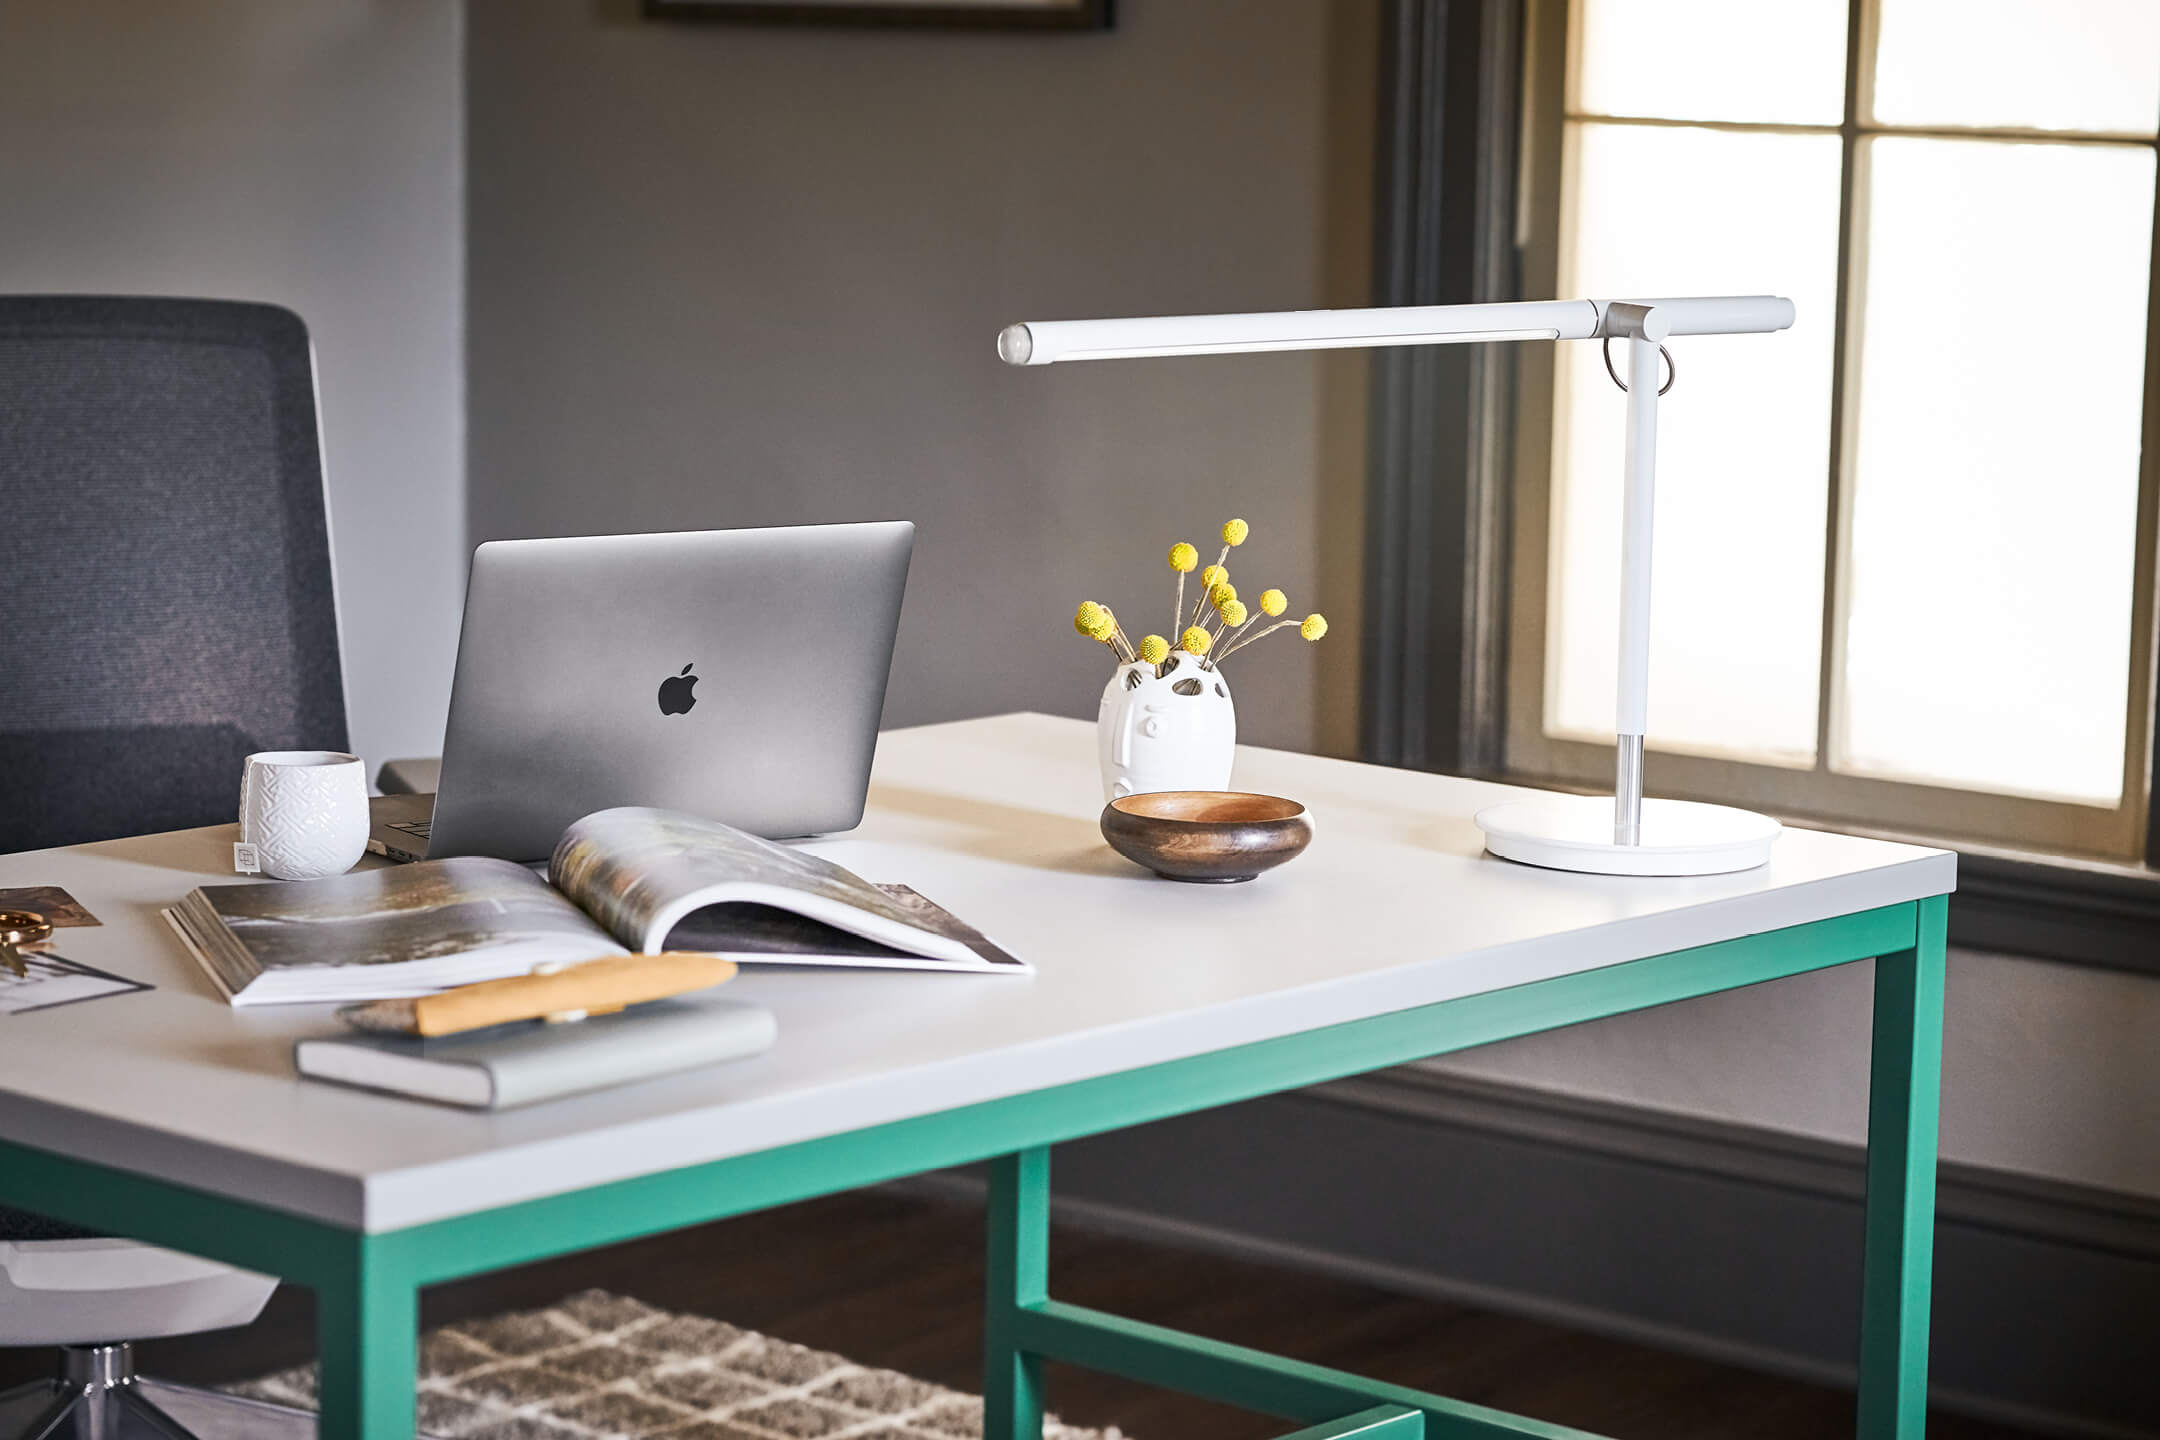 Haworth Pablo Pardo Designer office desk lamp over book on table with office chair at it